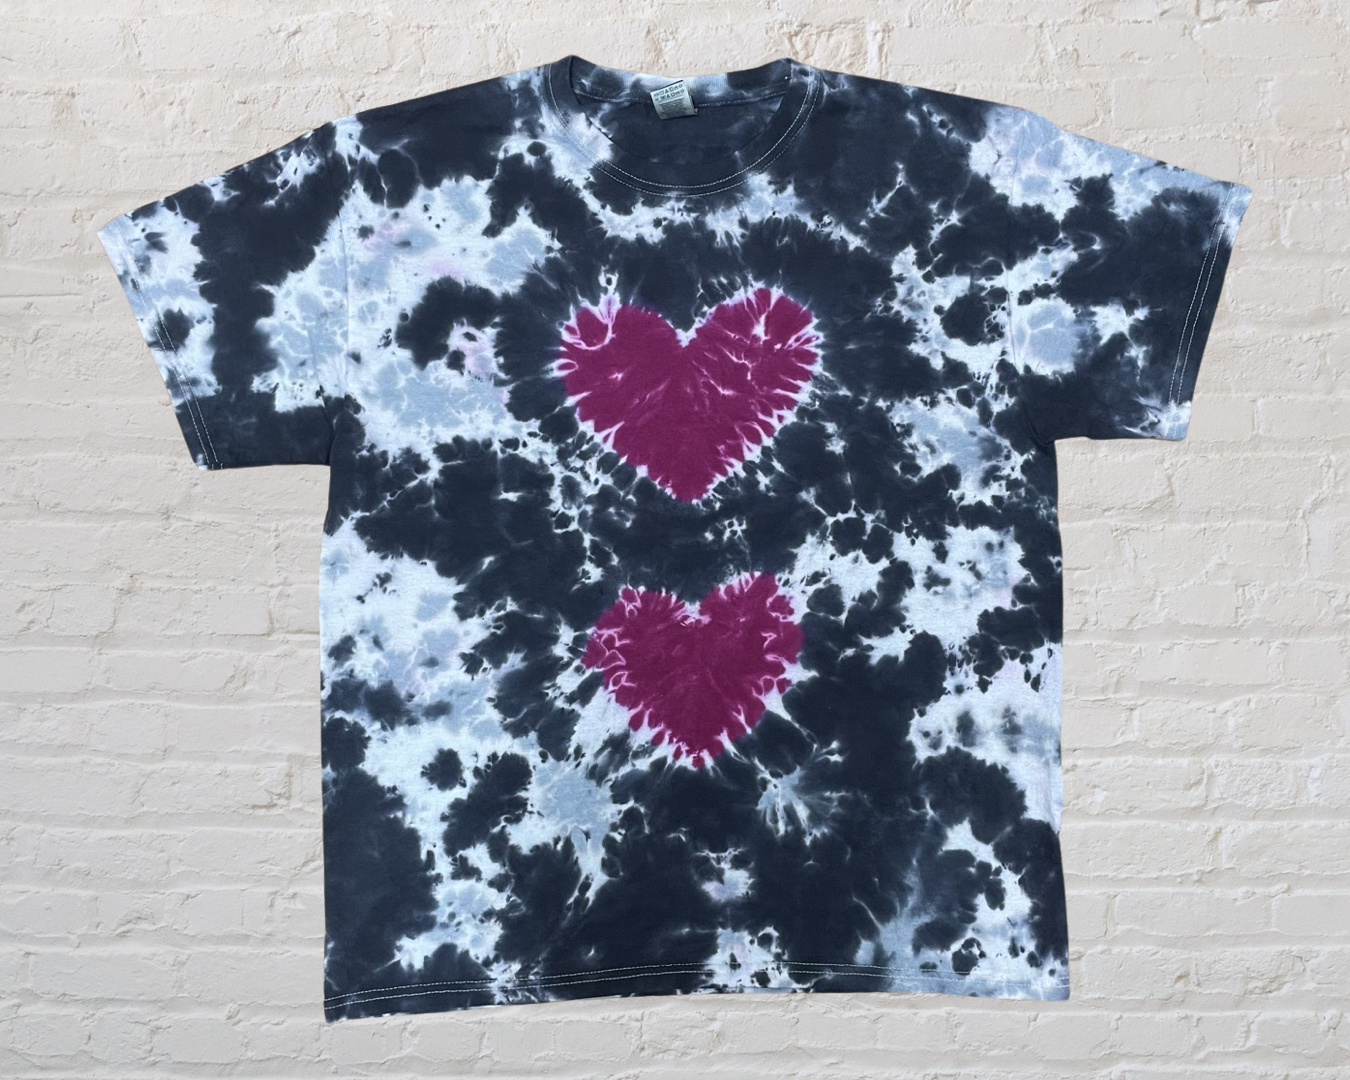 This Large Unisex Short Sleeve is made with love by Rainbow Sunshine Dye by Sol! Shop more unique gift ideas today with Spots Initiatives, the best way to support creators.